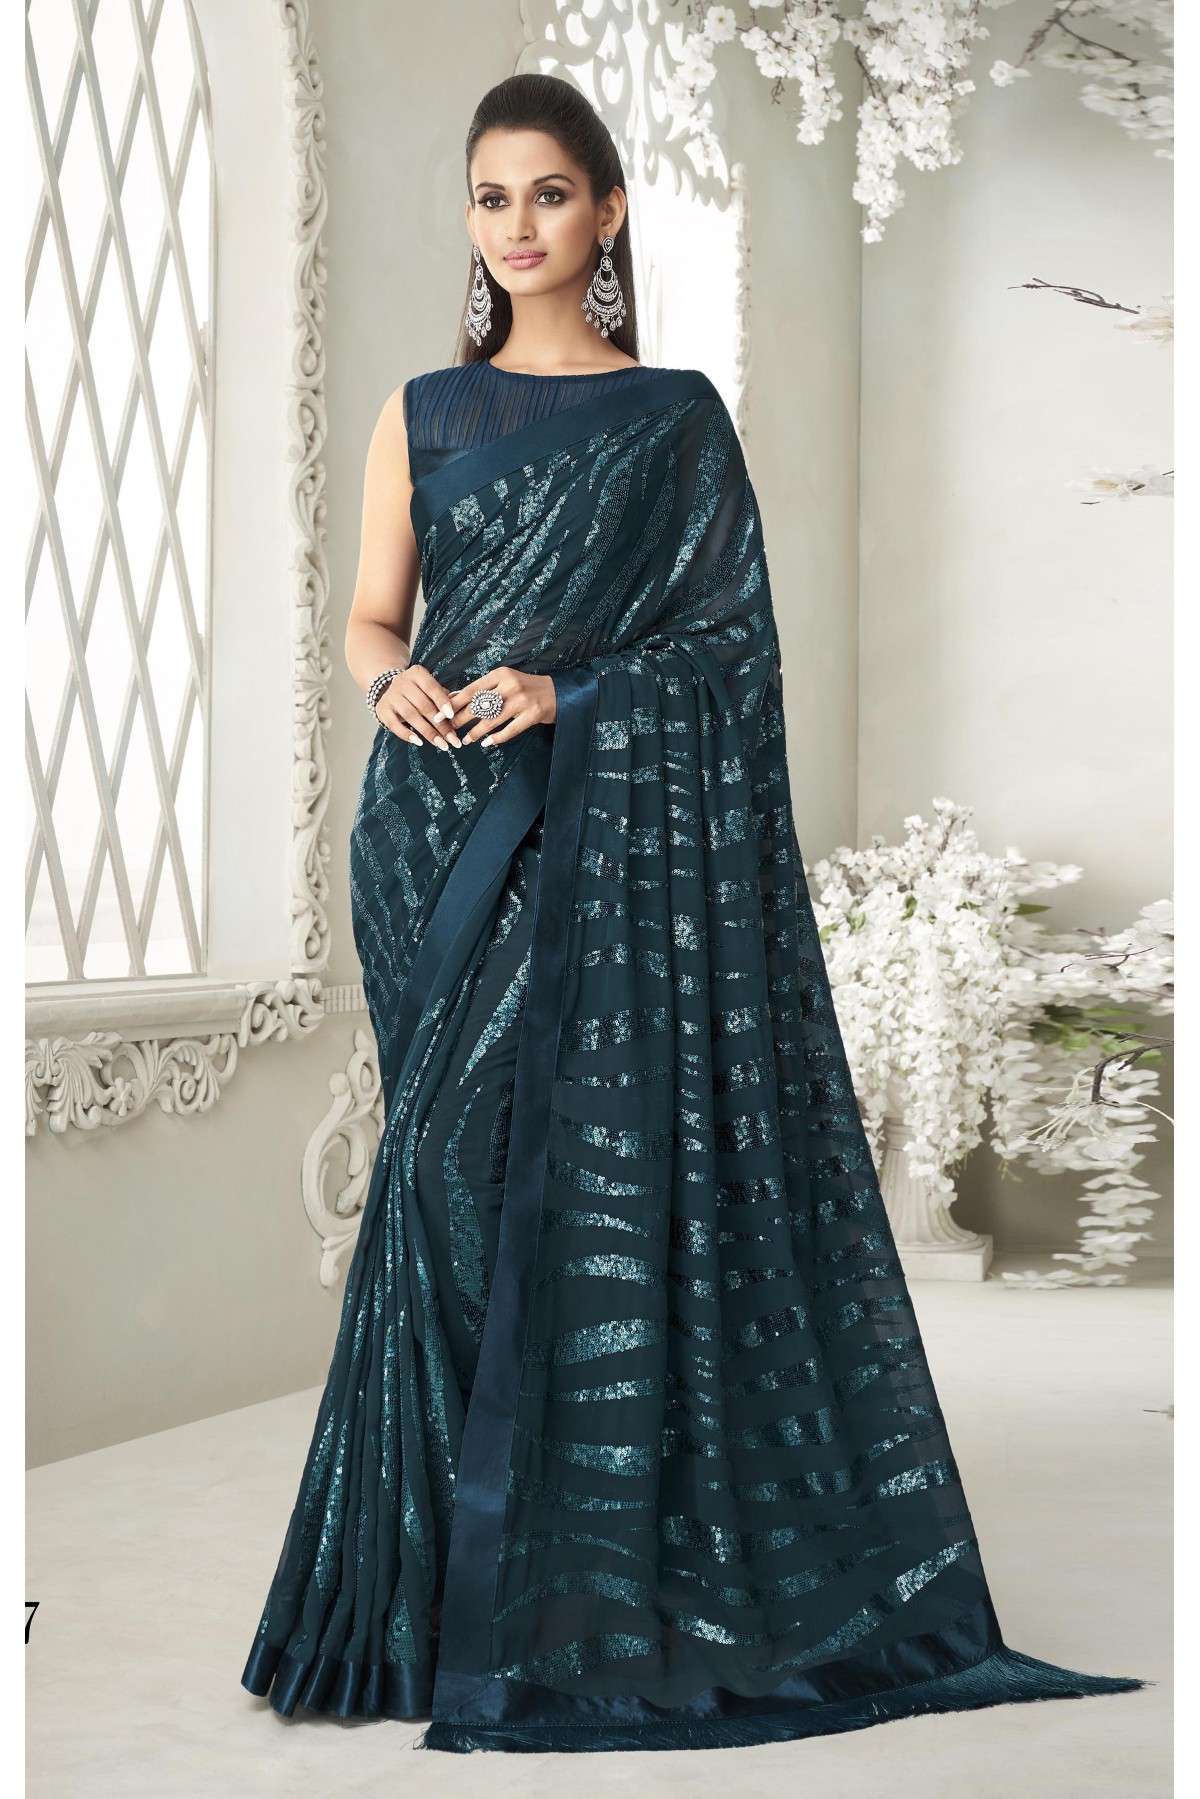 Georgette Embroidery Saree In Teal Colour - SR09406119